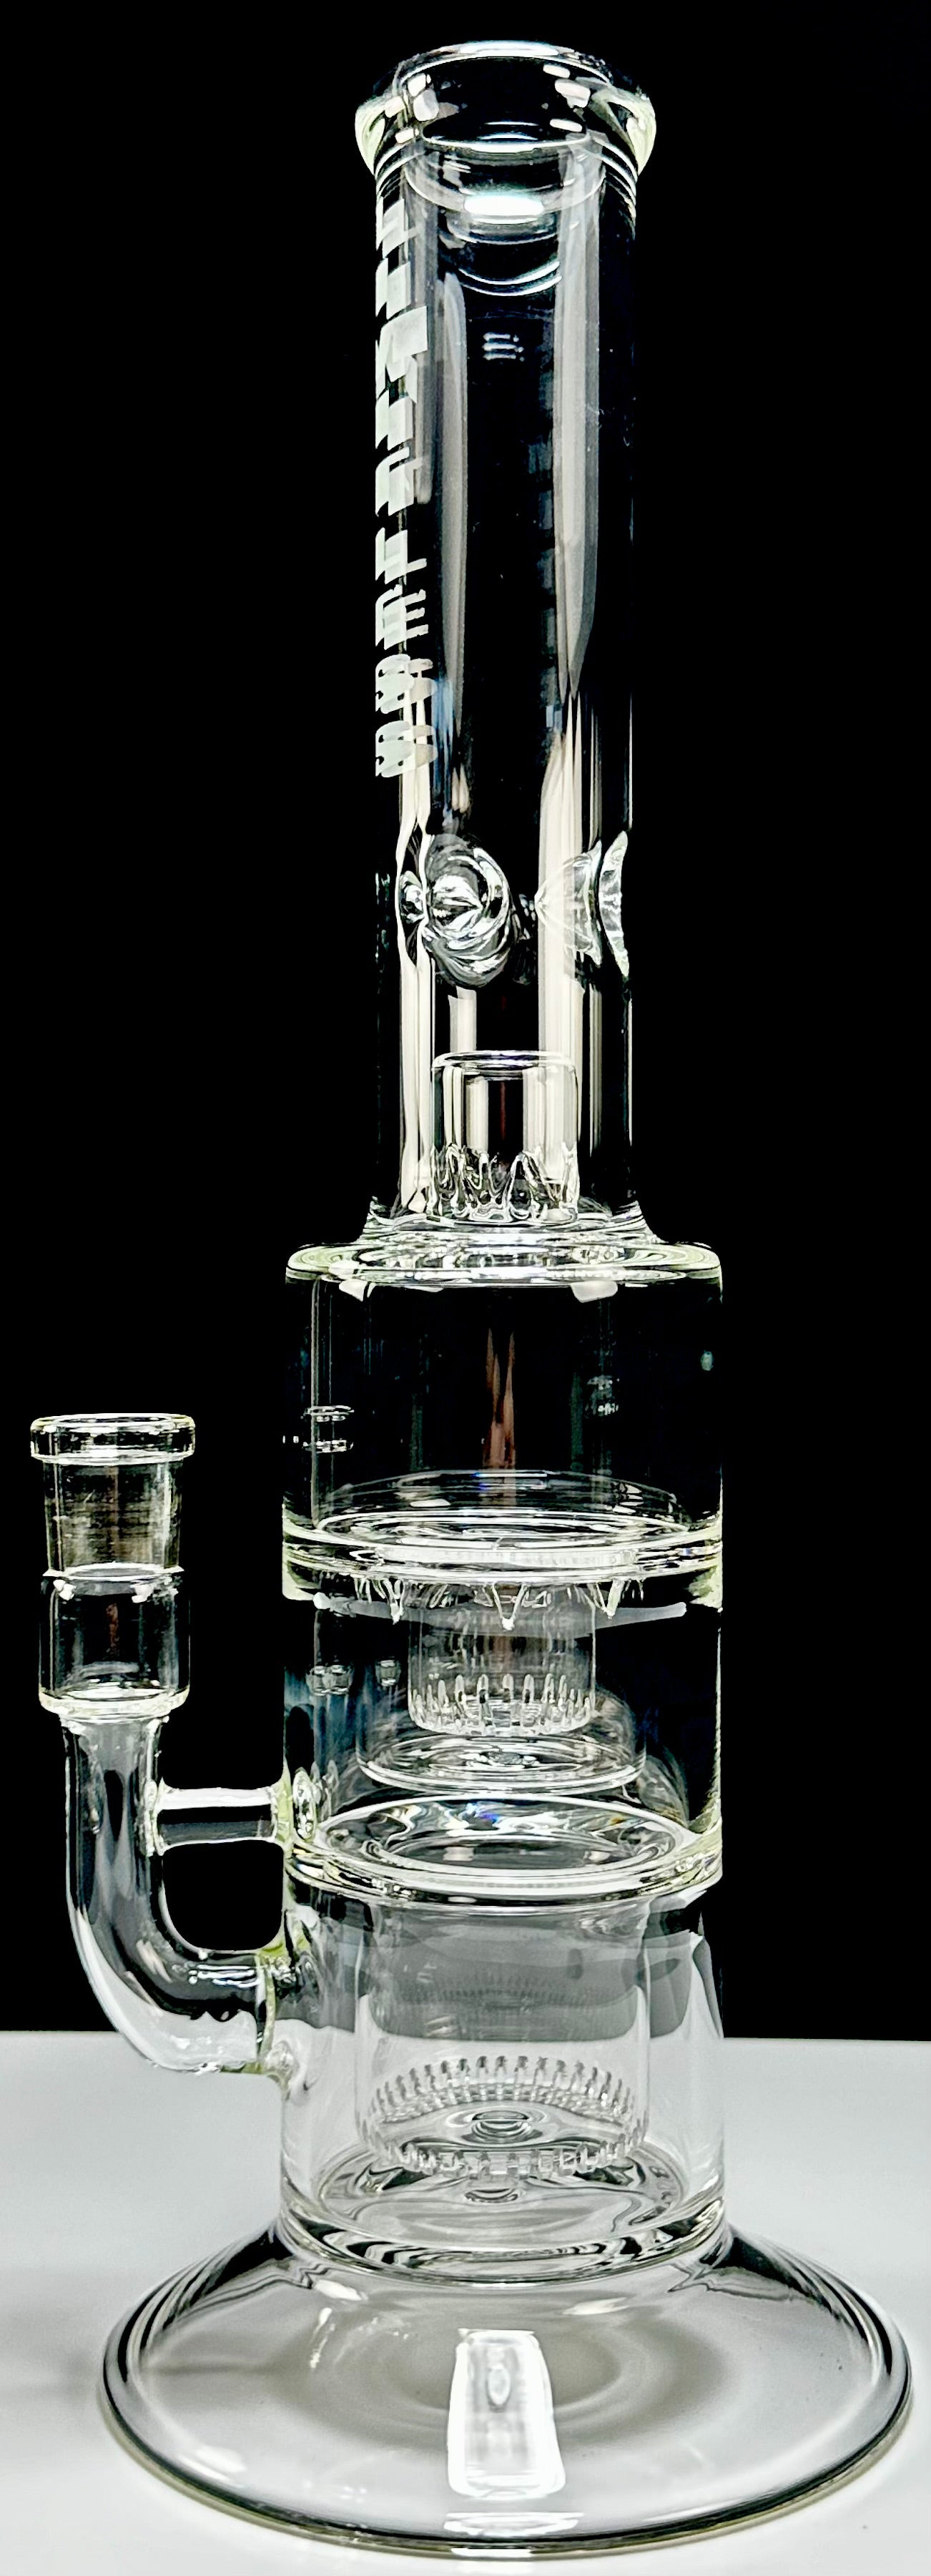 LIMITLESS GLASS 18mm DOUBLE SHOWERHEAD TUBE